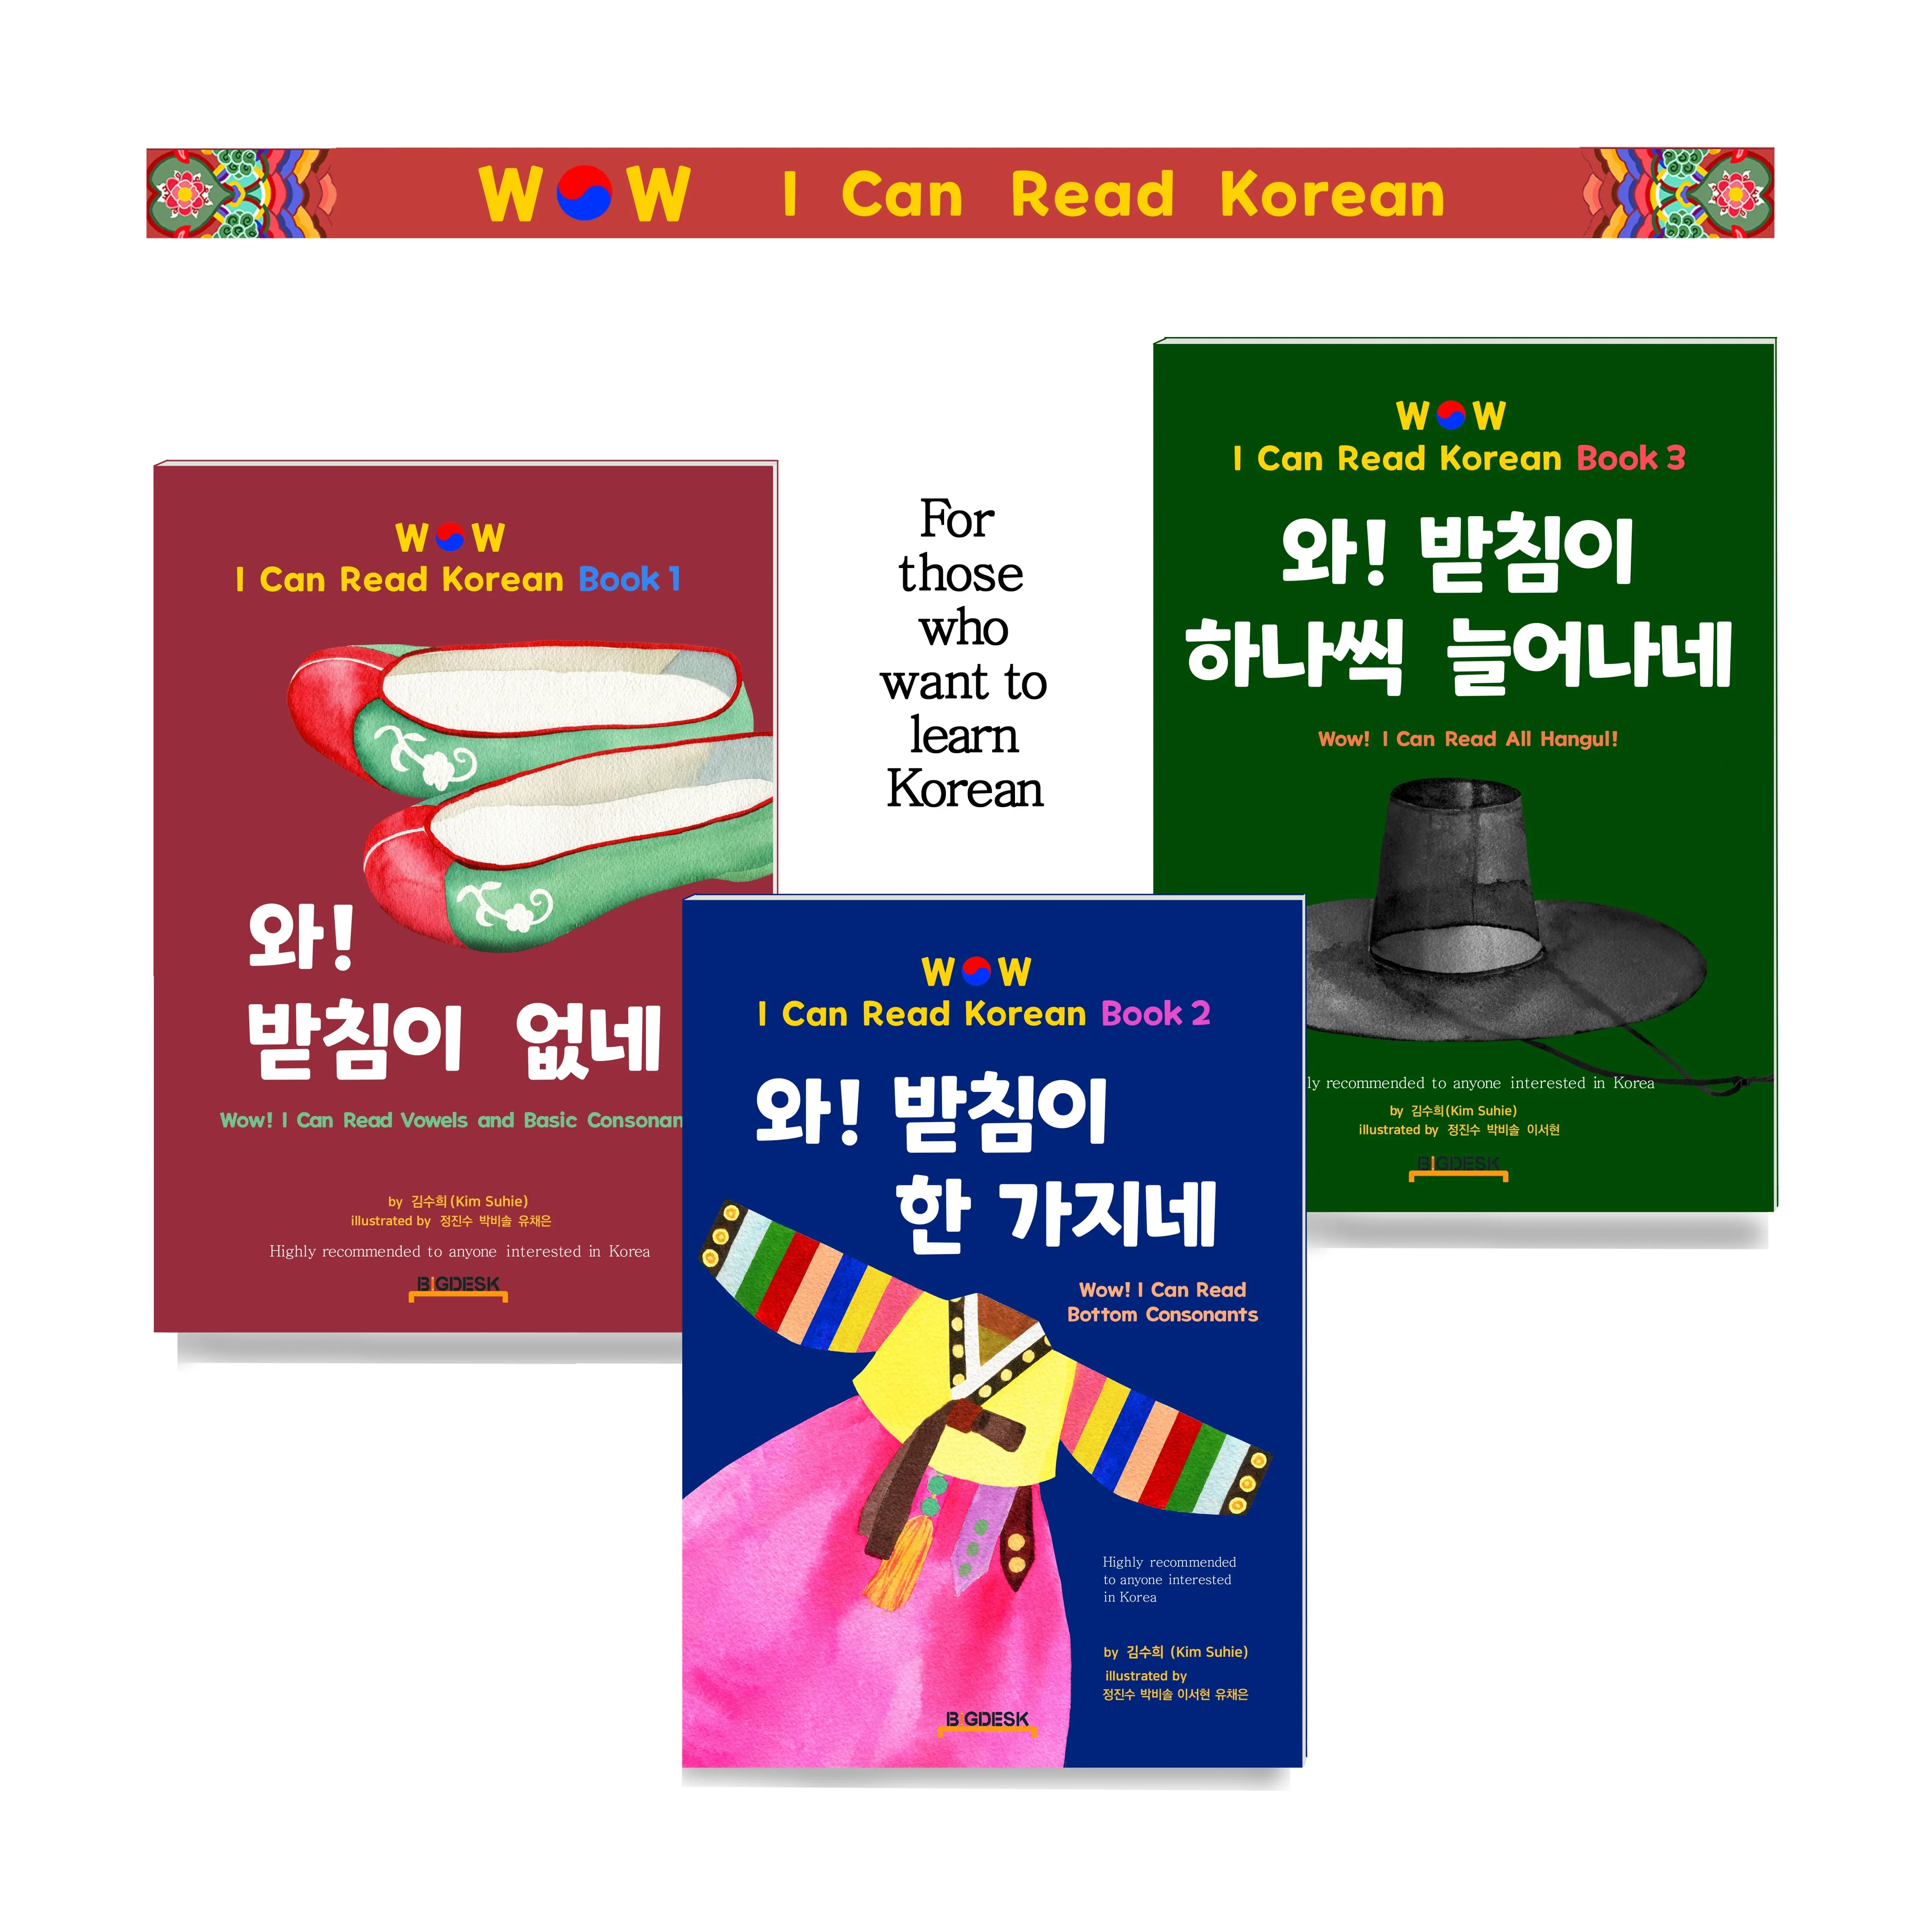 BIGDESK  Korean language learning book 1 guide book for foreigners and children made in Korea KOTRA